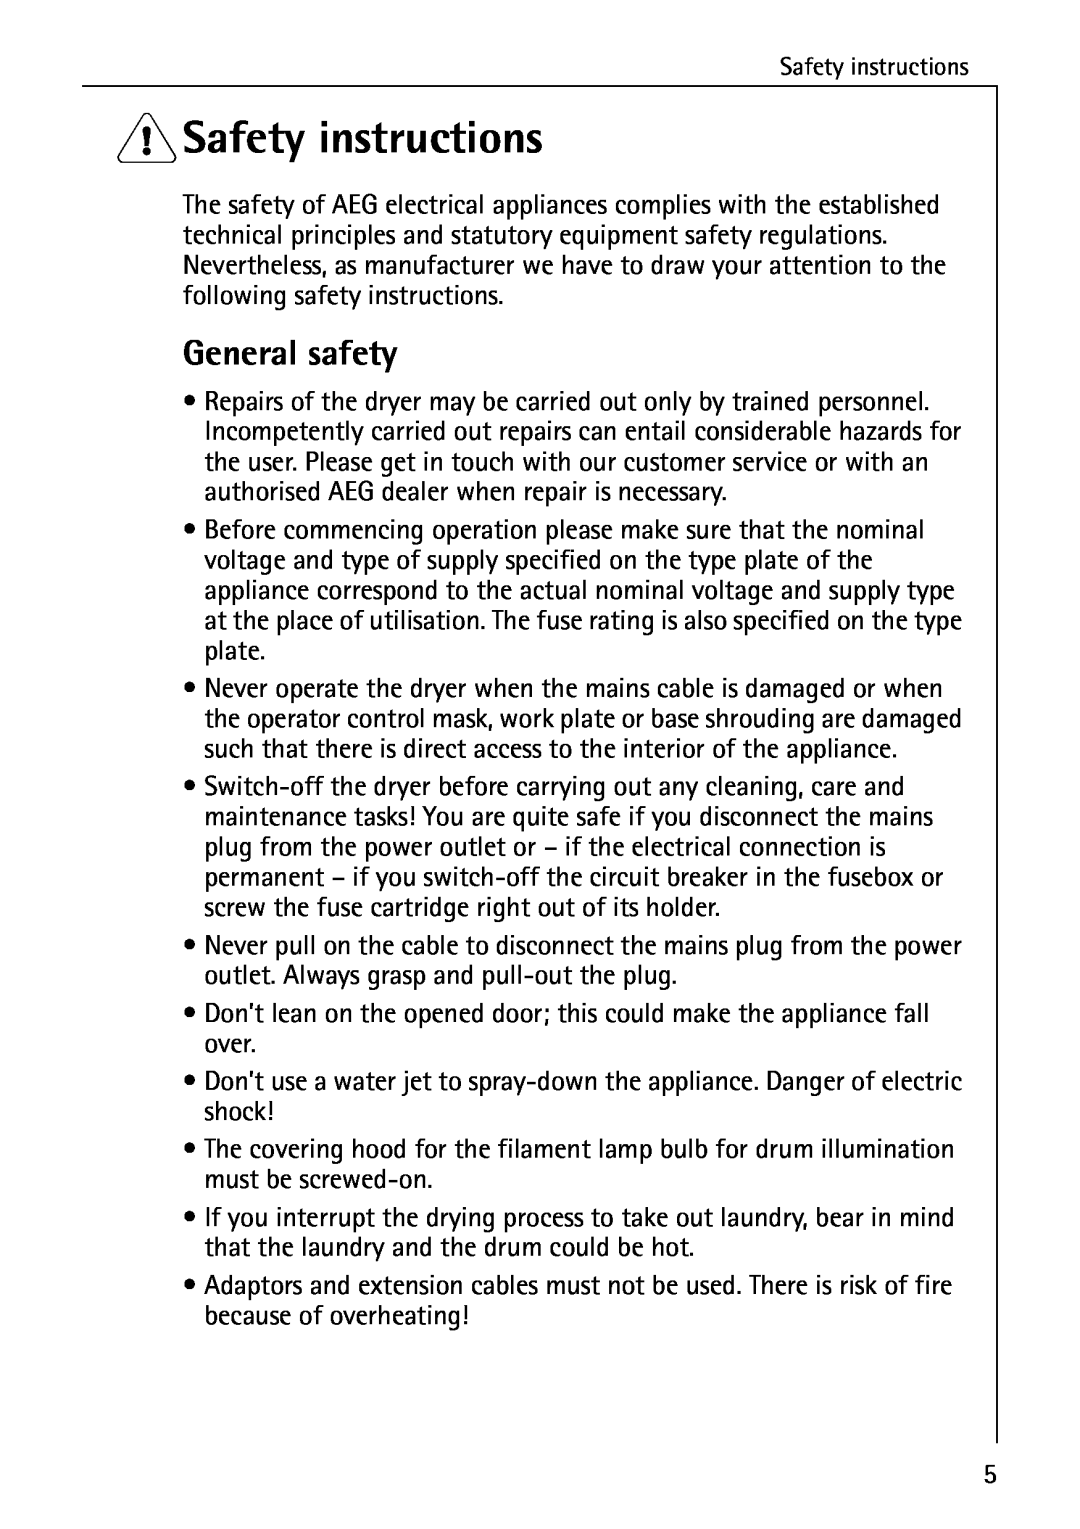 AEG 56609 operating instructions 1Safety instructions, General safety 